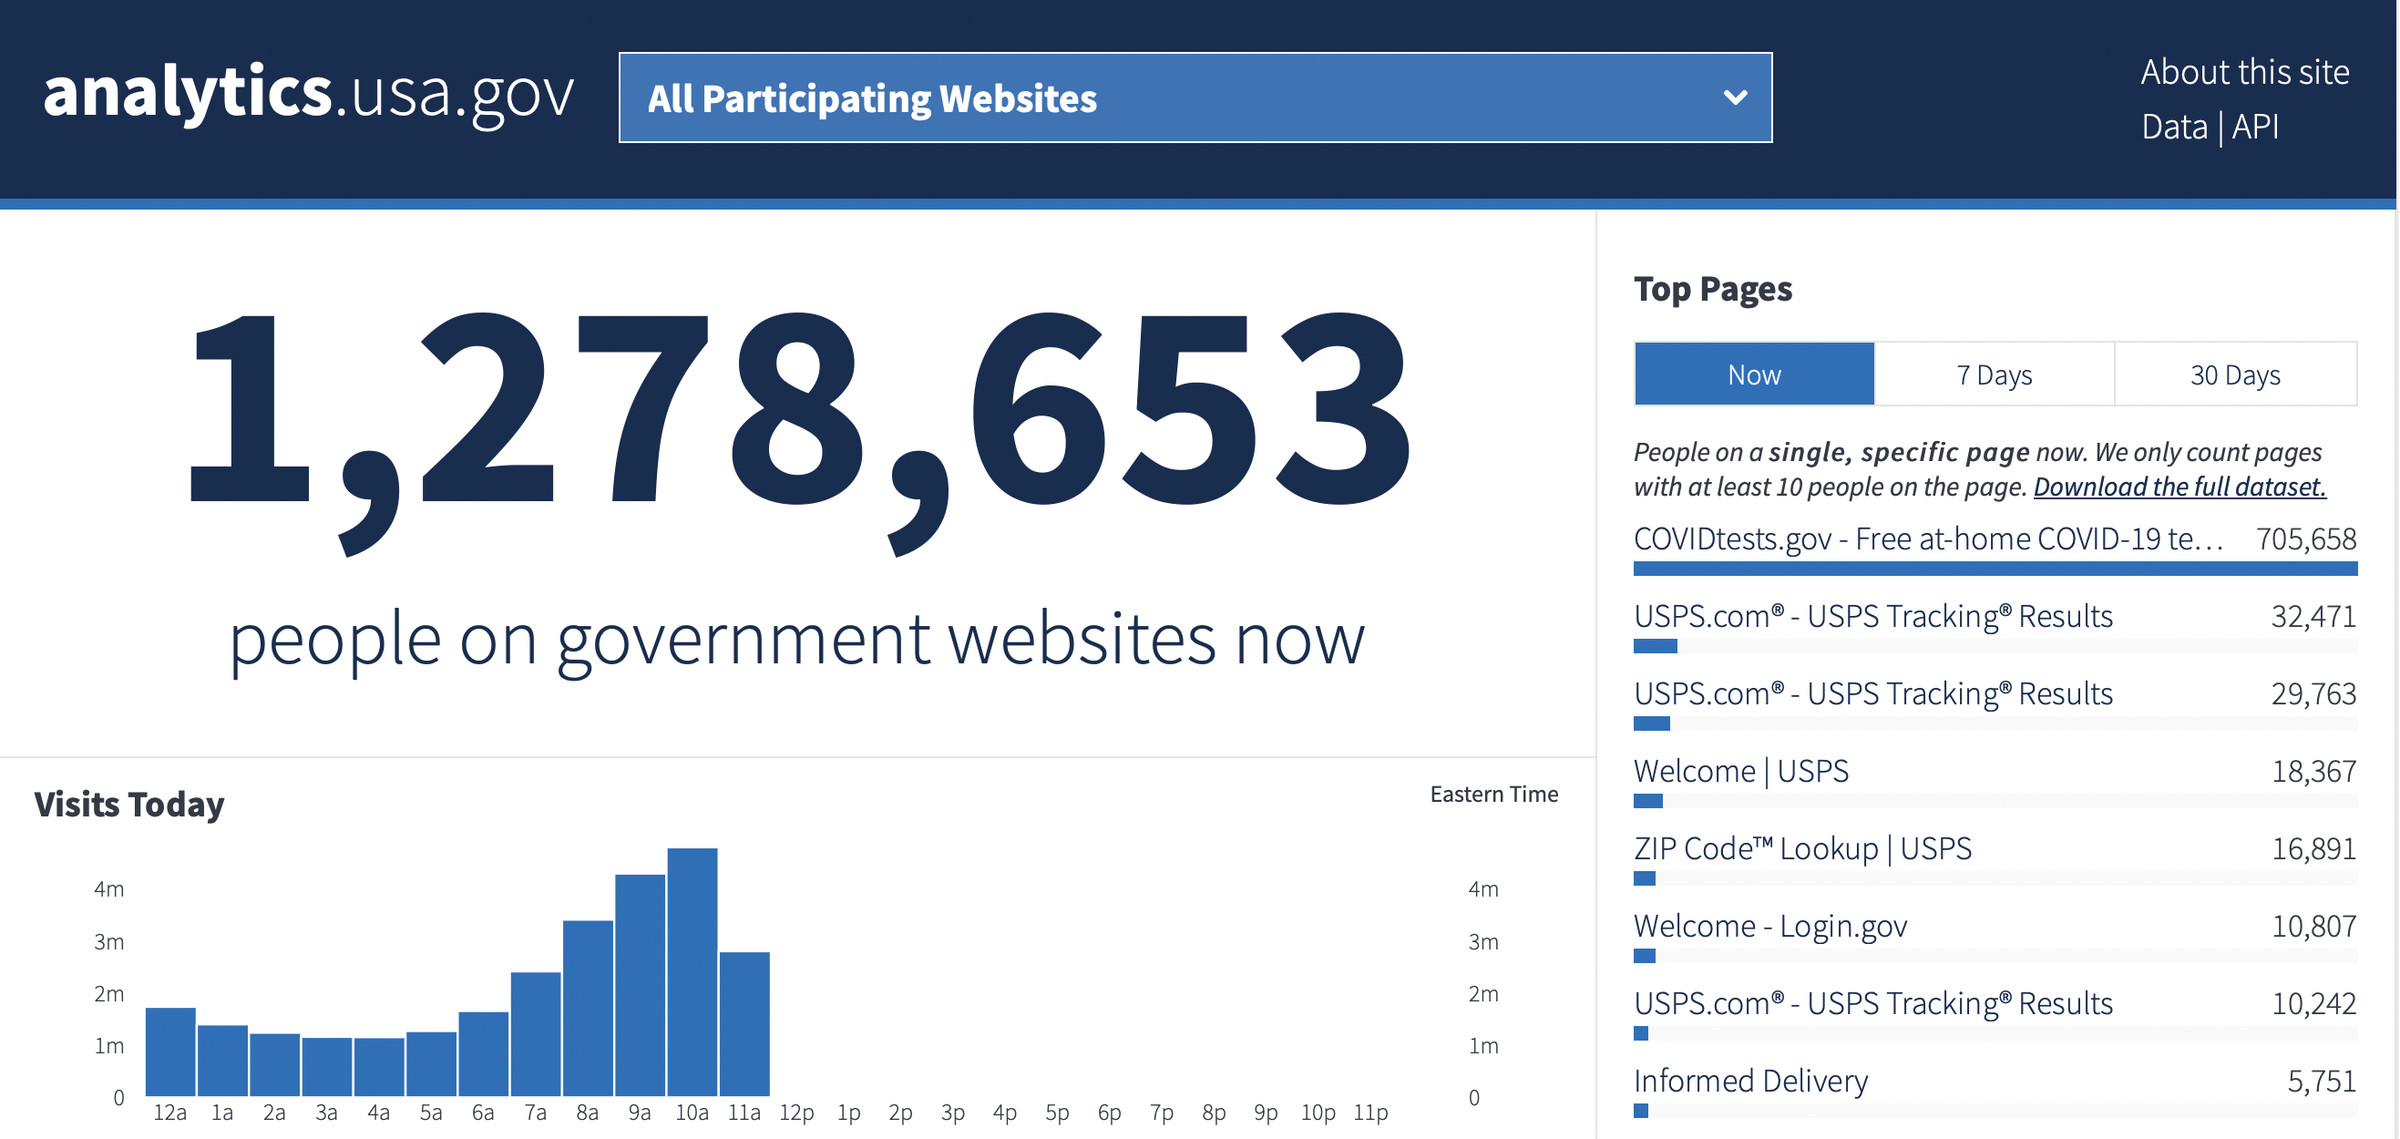 At times, the COVIDtests.gov page had over 705,000 visitors.